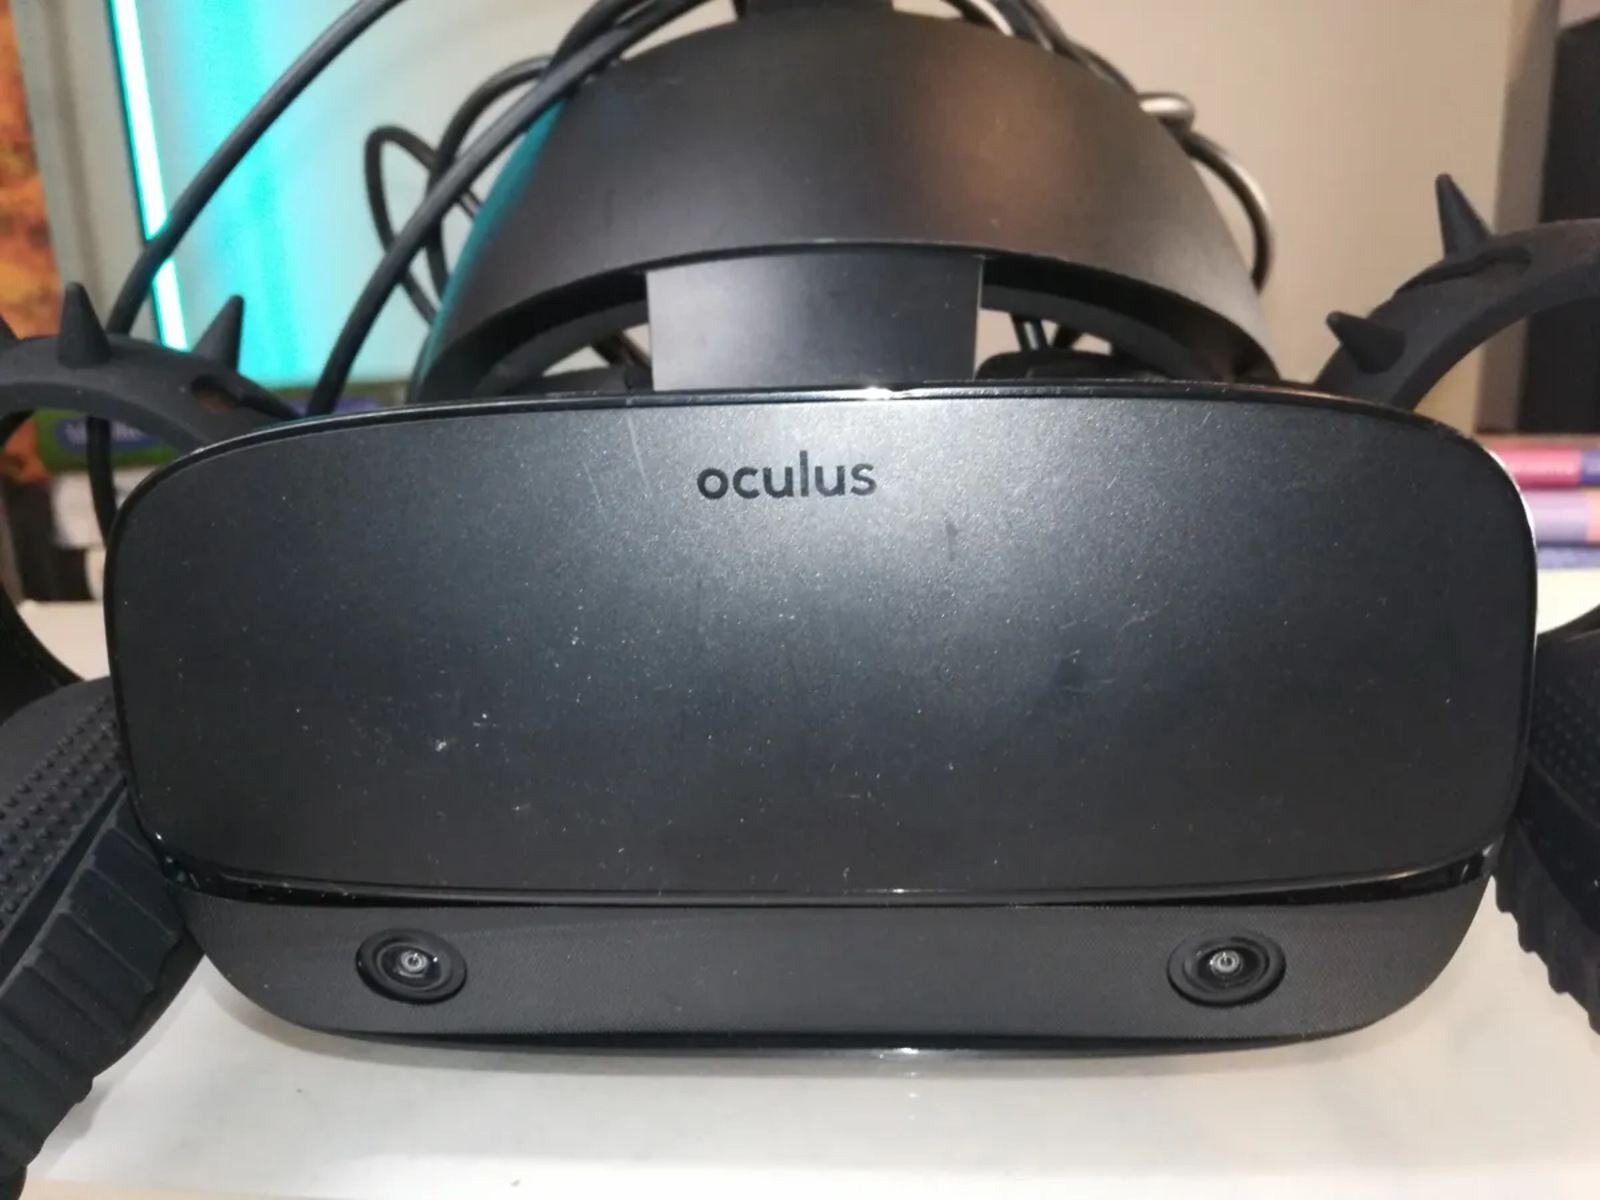 how-to-set-up-oculus-rift-s-pc-powered-vr-gaming-headset